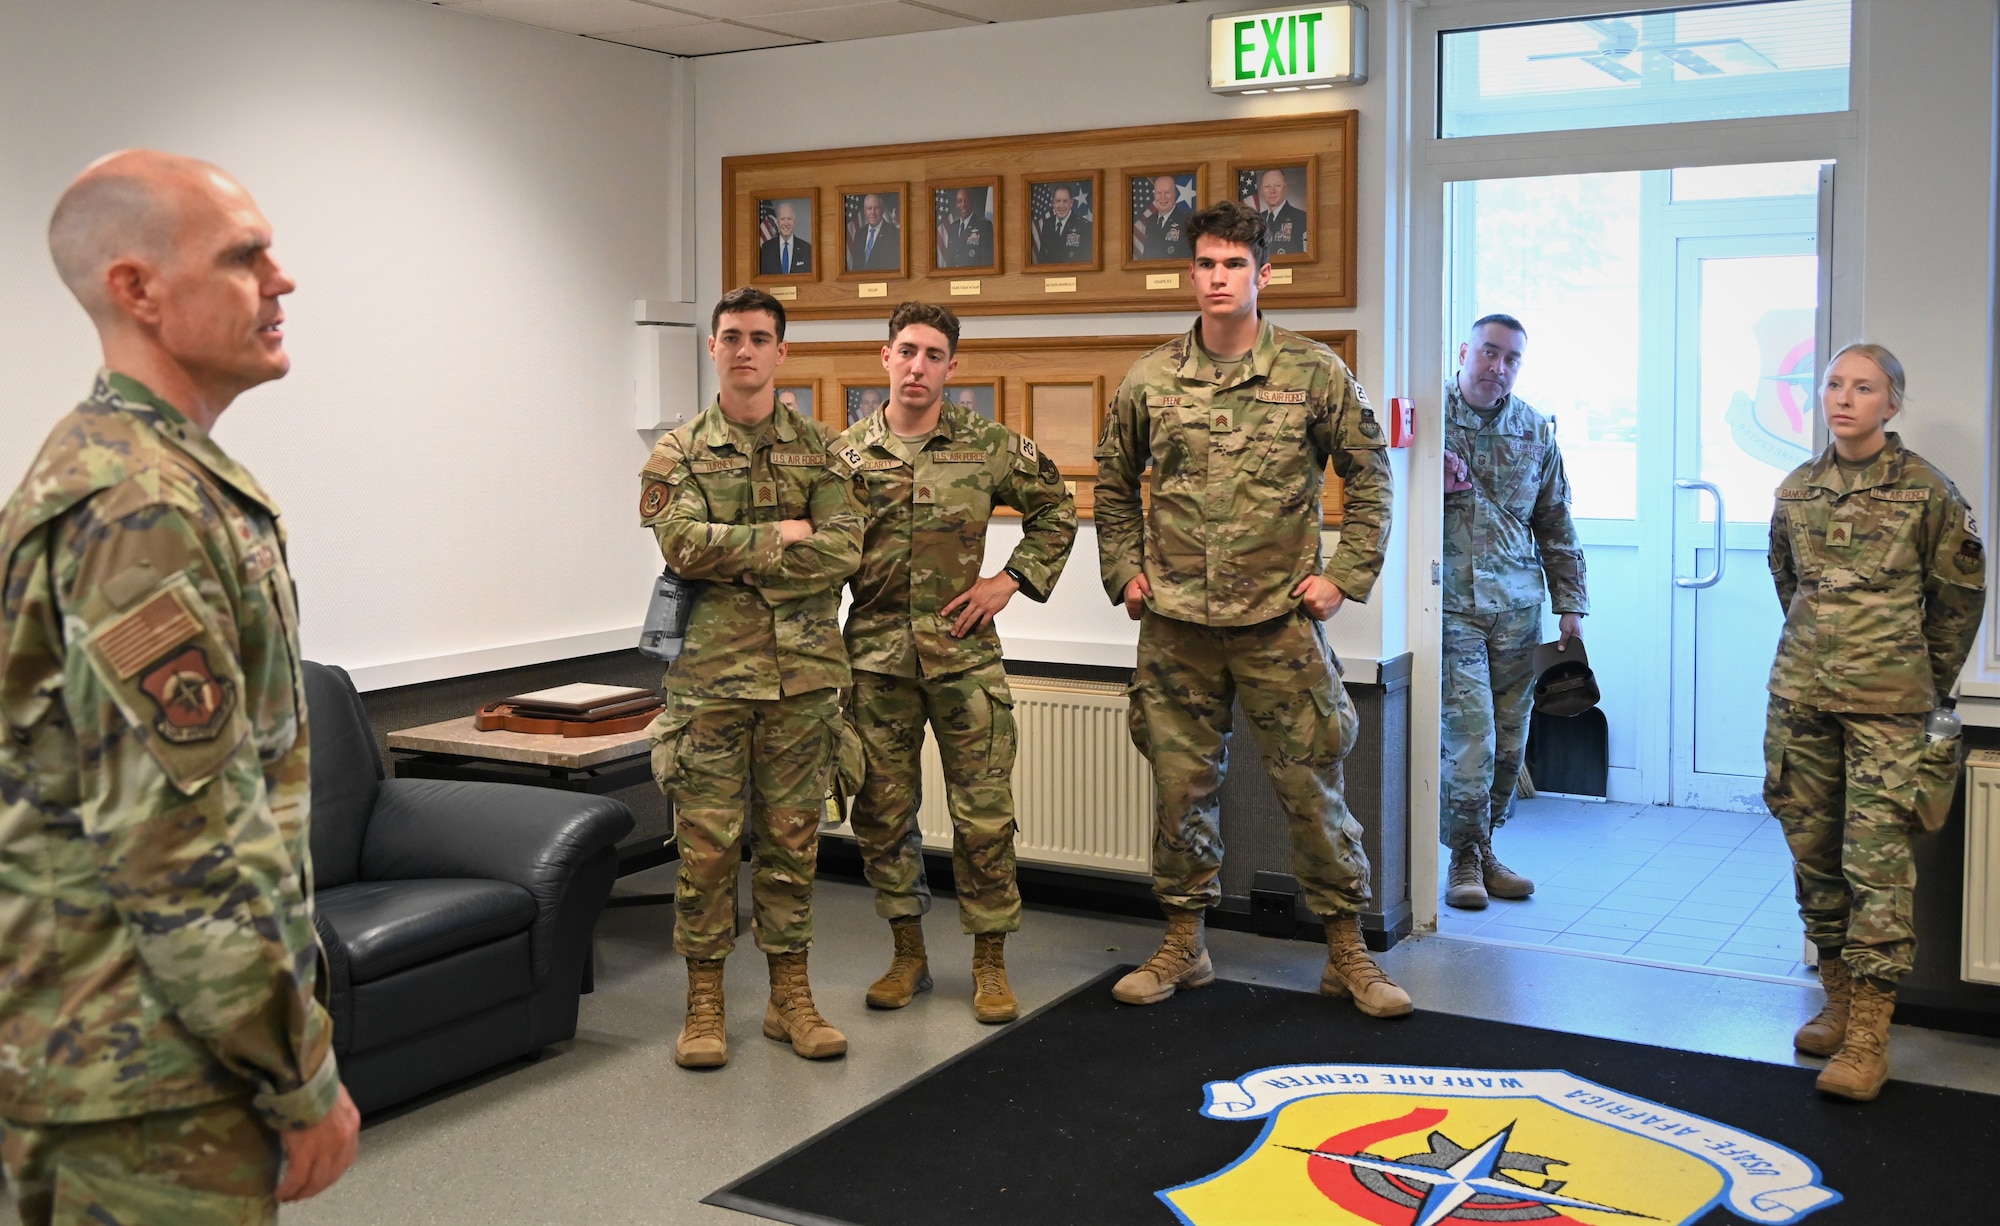 The USAF Cadets are greeted by Col. Dean Berck, Commander, USAFE-AFAFRICA Warfare Center, before they receive a mission brief and tour of the campus.